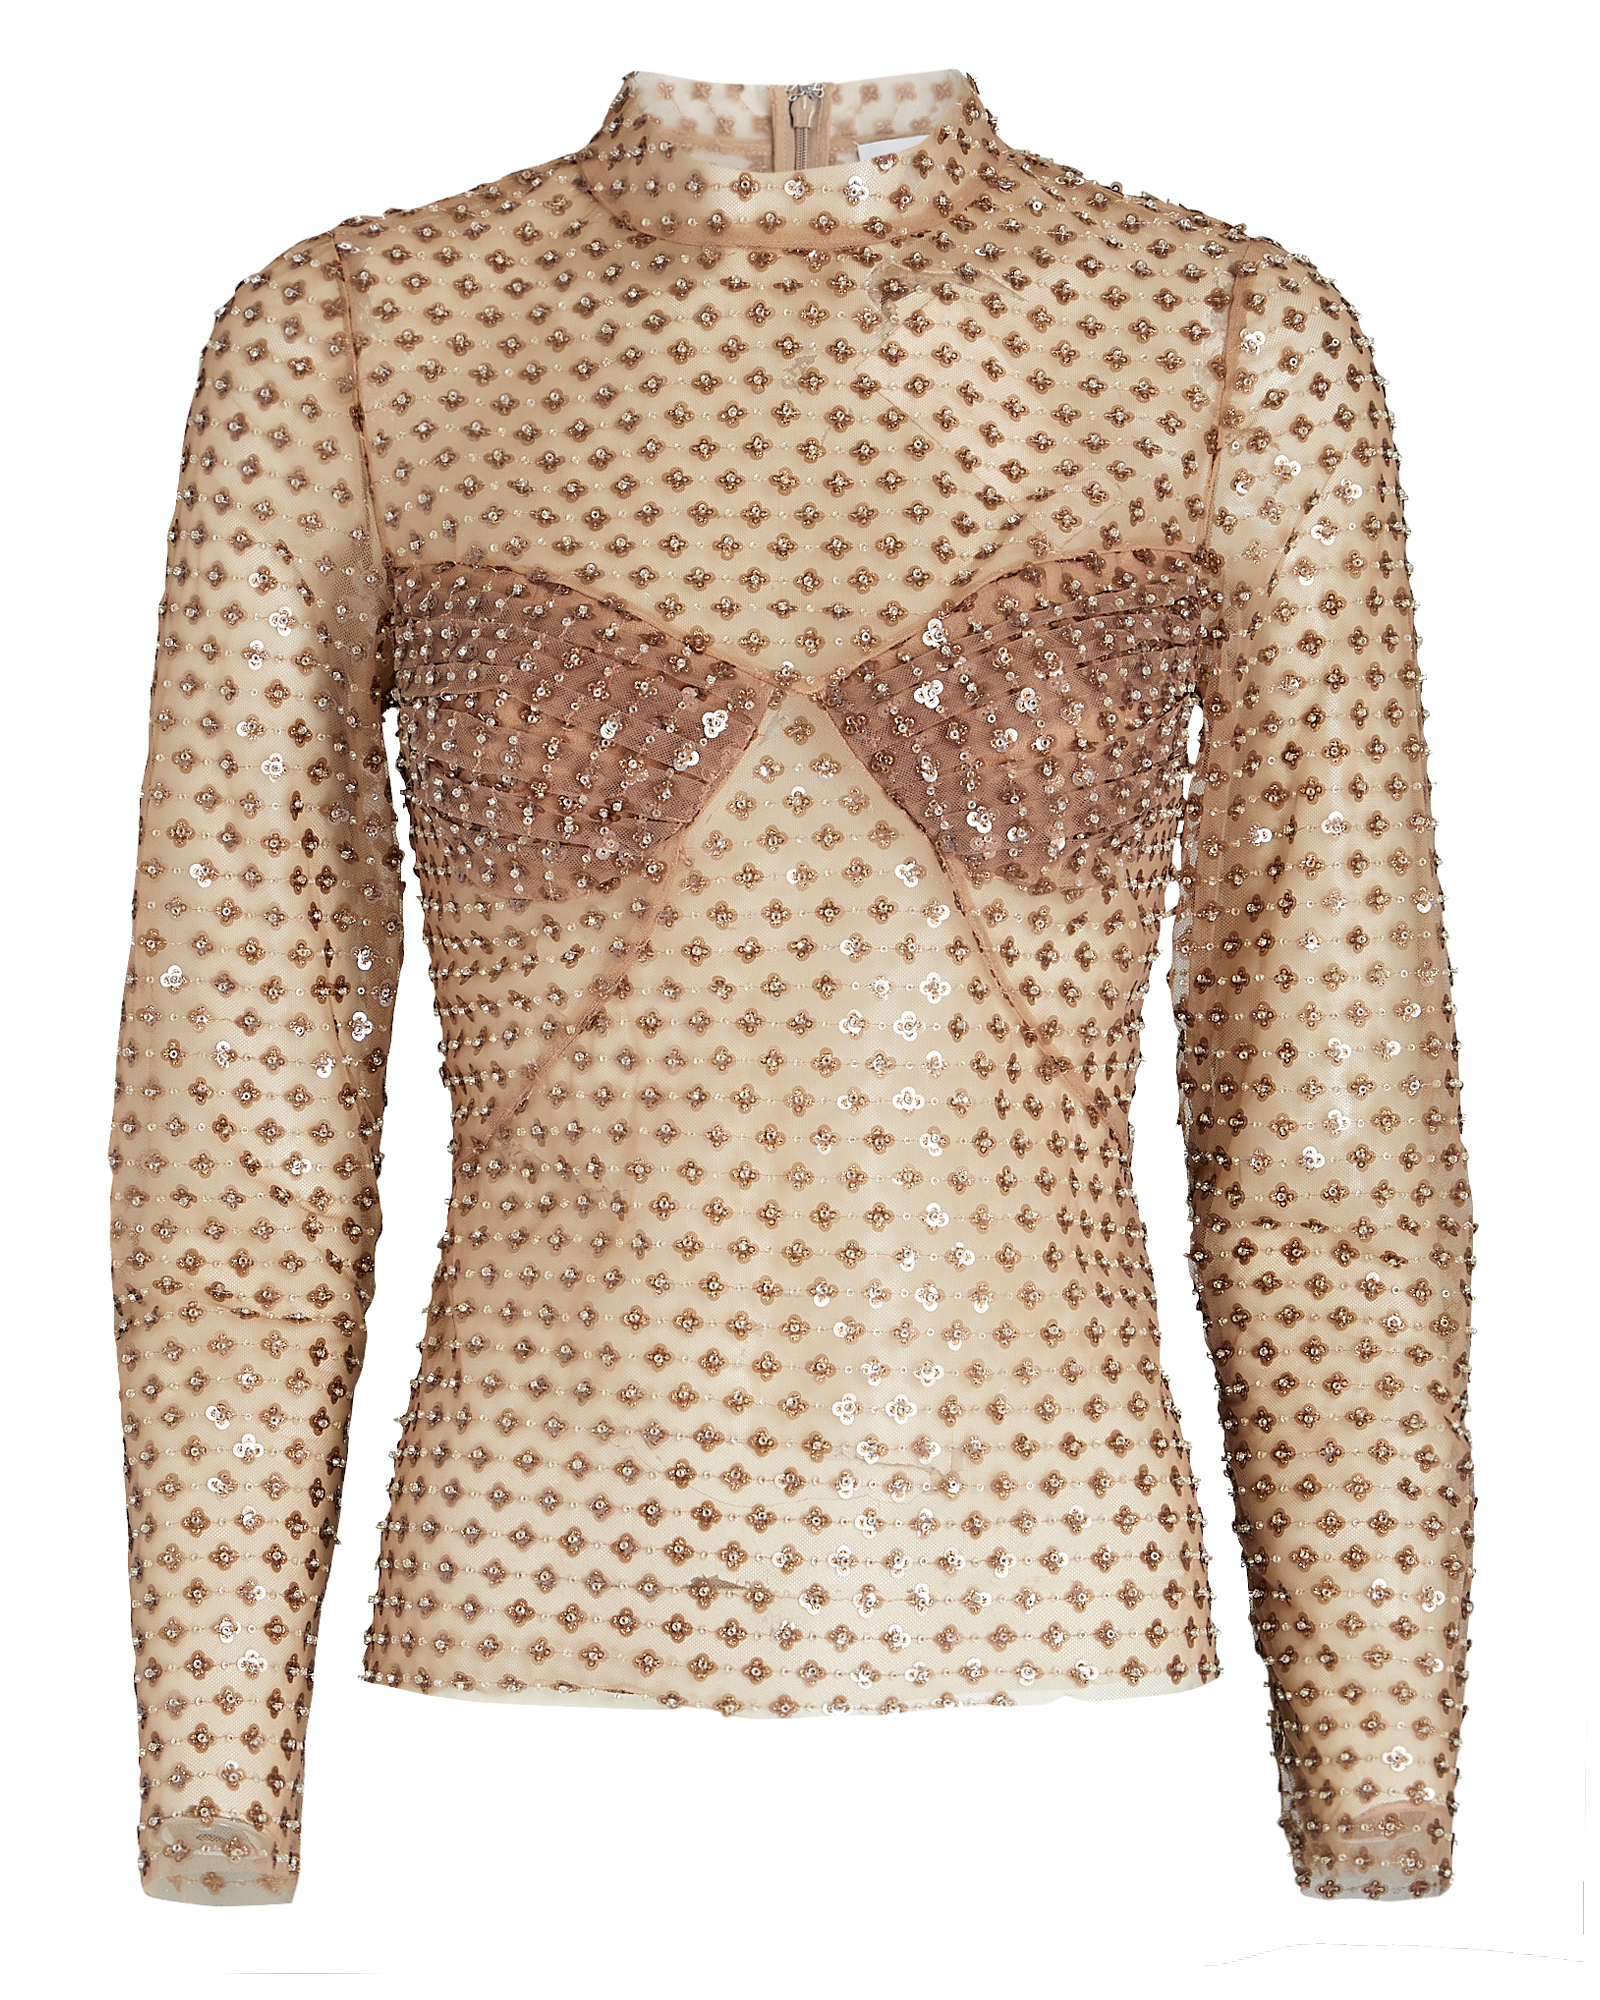 Self-Portrait Dot Embellished Top In Brown | INTERMIX®